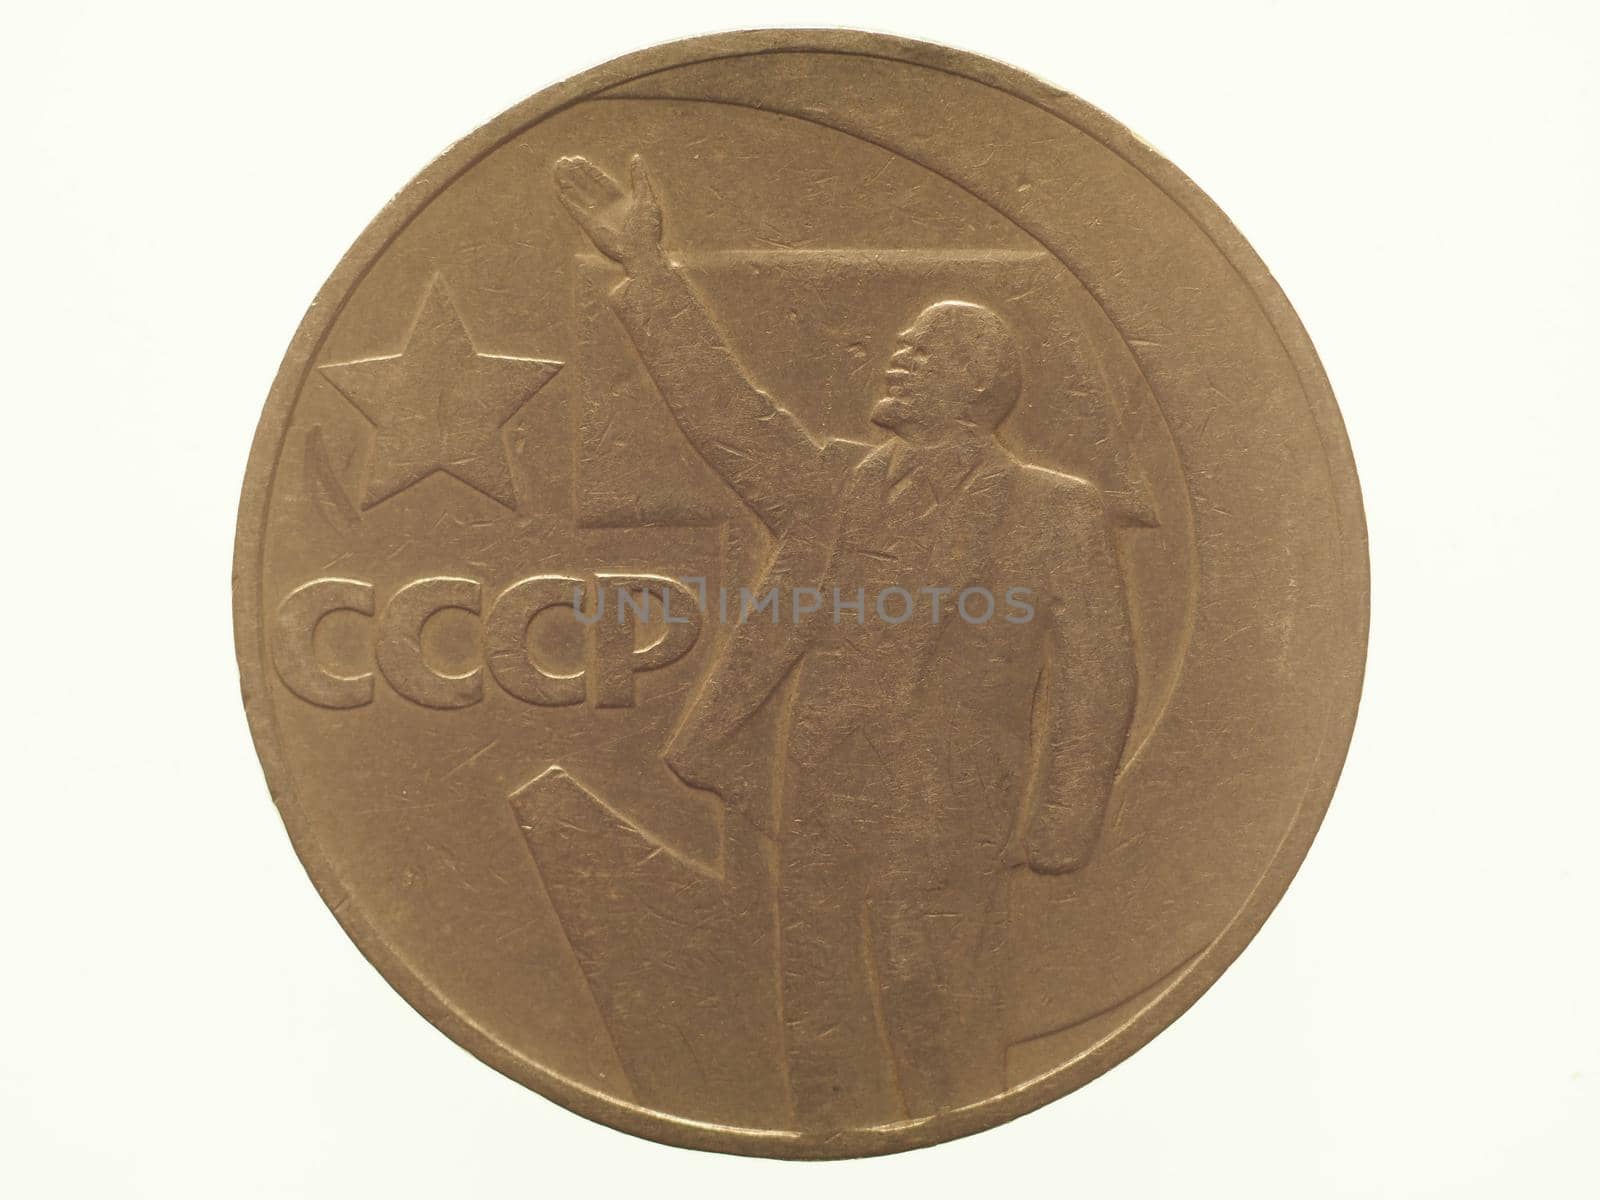 1 Ruble coin, back side showing Lenin, currency of Soviet Union isolated over white by claudiodivizia